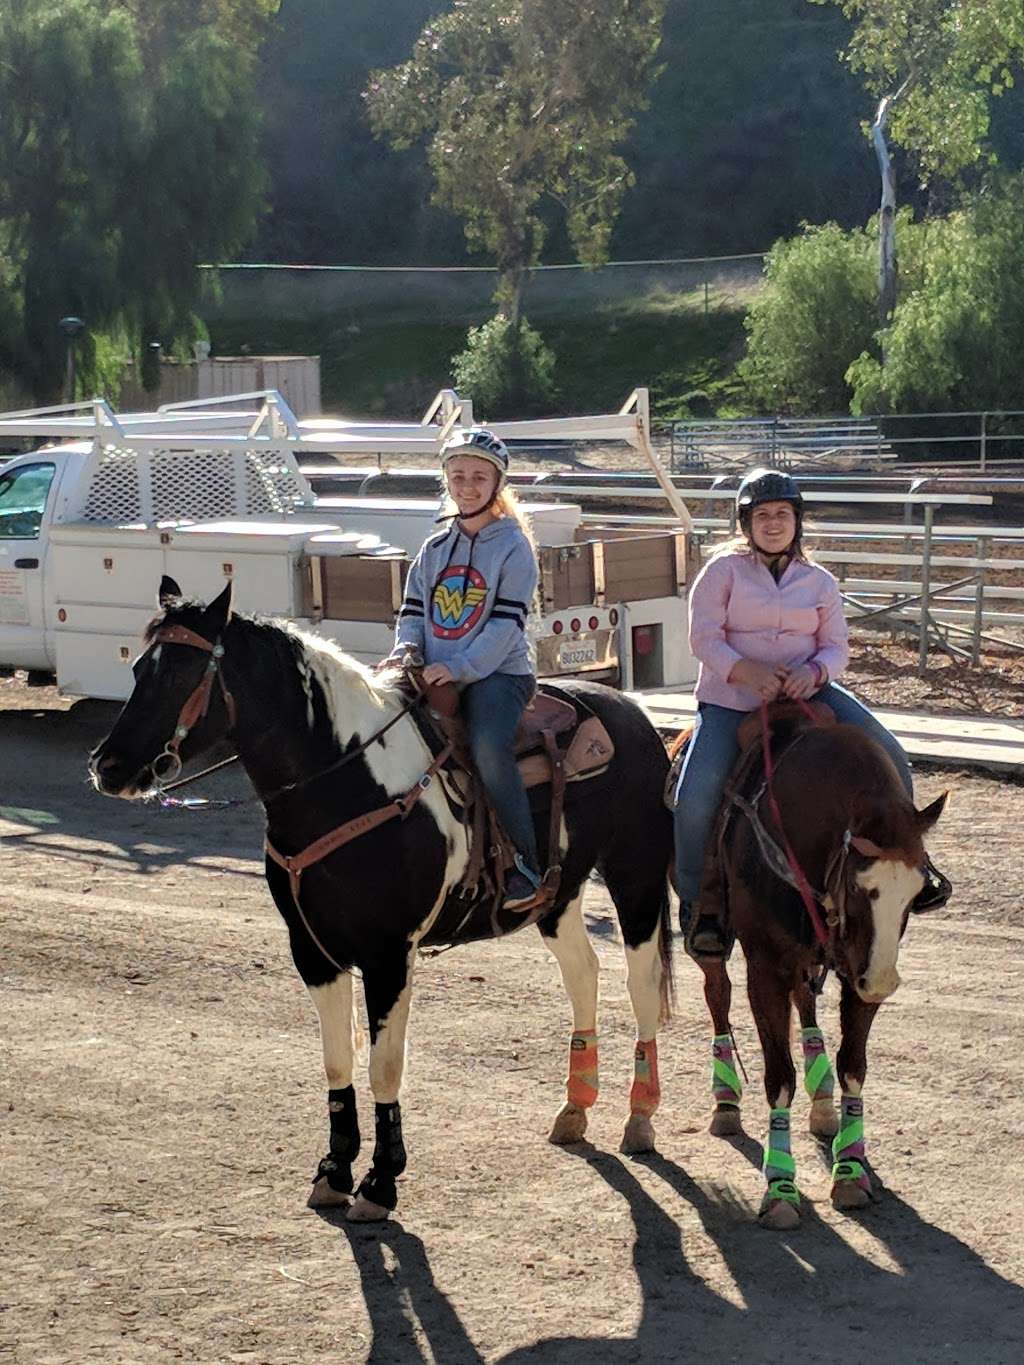 Arroyo Simi Equestrian Center | 2900 Royal Ave, Simi Valley, CA 93065 | Phone: (805) 584-4400